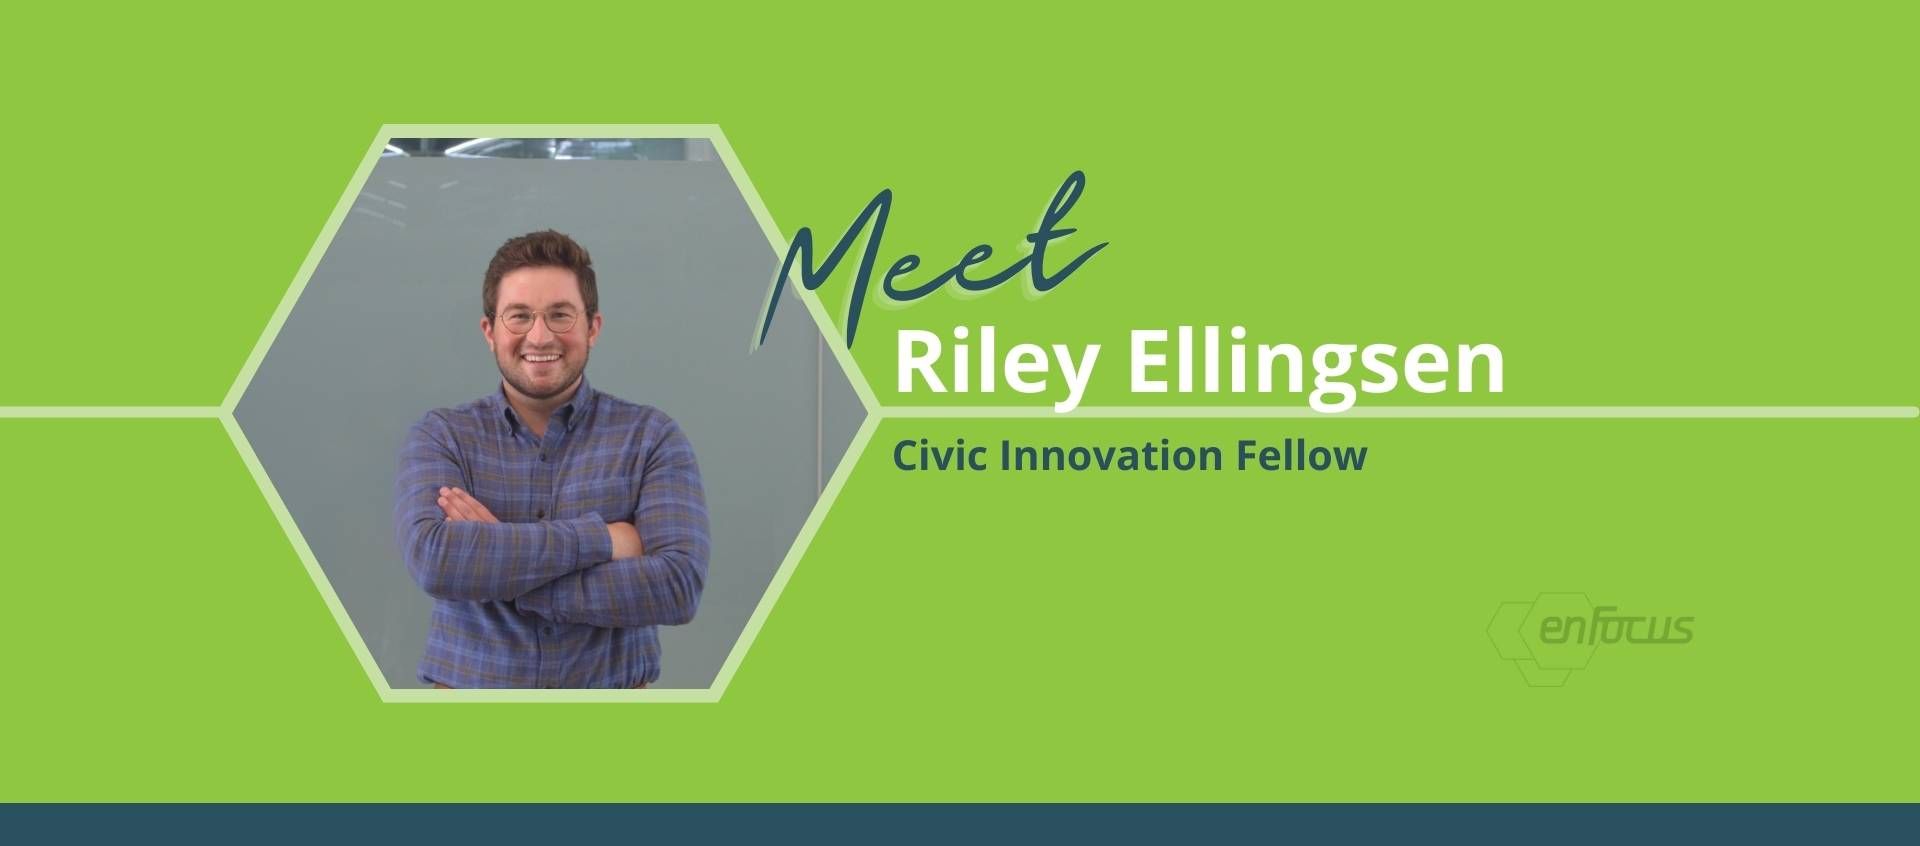 Riley Improves Lives at the Crossroads Between Technology and Medicine